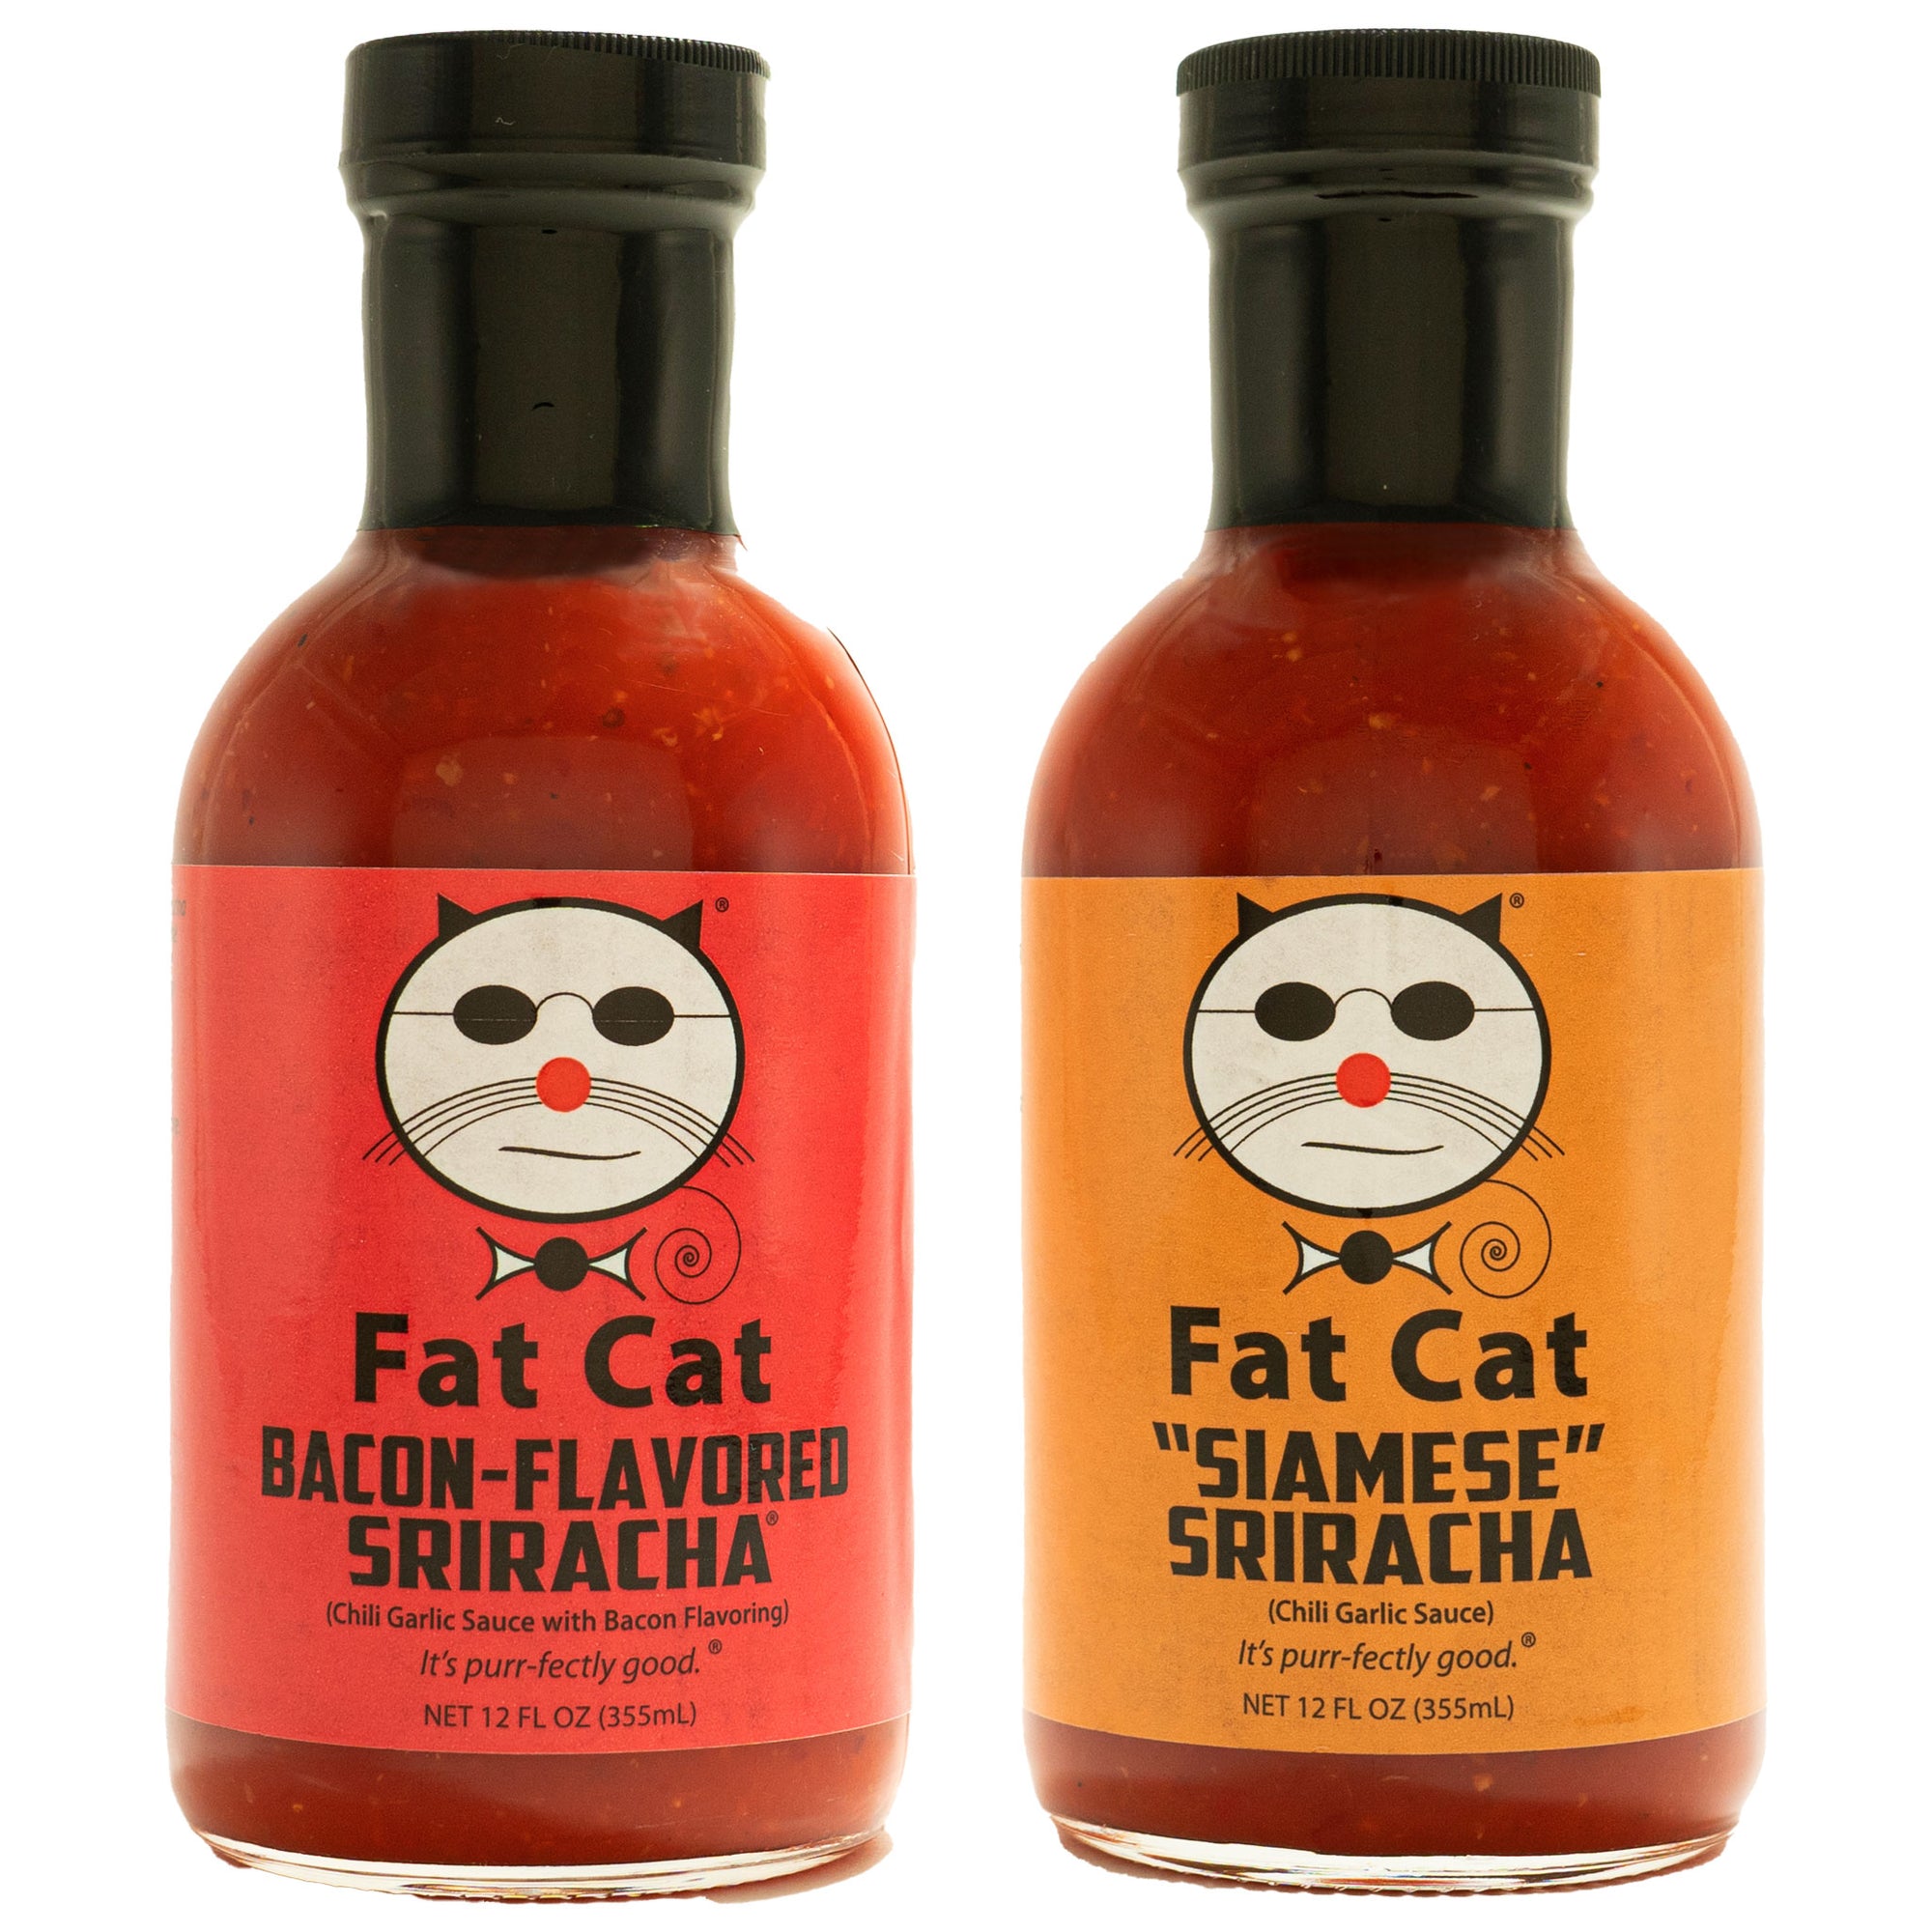 Fat-Cat-Gourmet-Siamese-Sriracha-Bacon-Flavored-Sriracha-Two-Pack-Side-By-Side